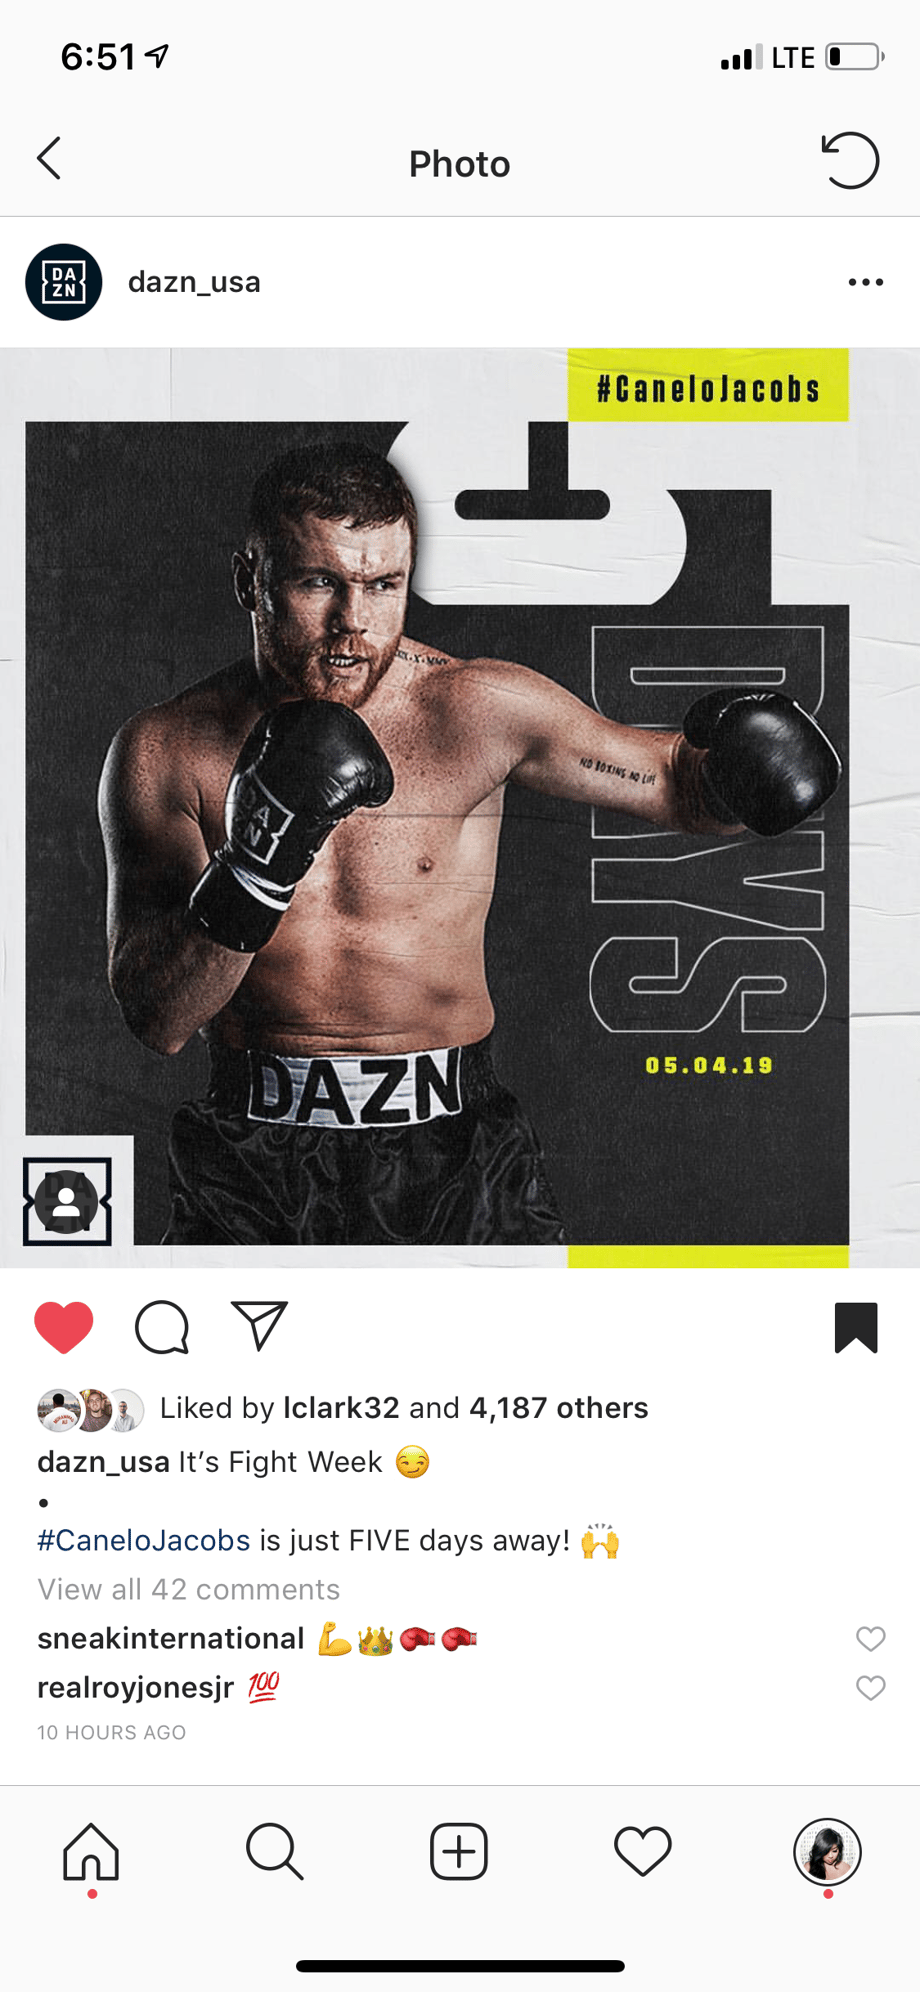 Screen shot shows AK Collective's action shot of Canelo as featured on the dazn_usa Instagram feed in advance of the fight